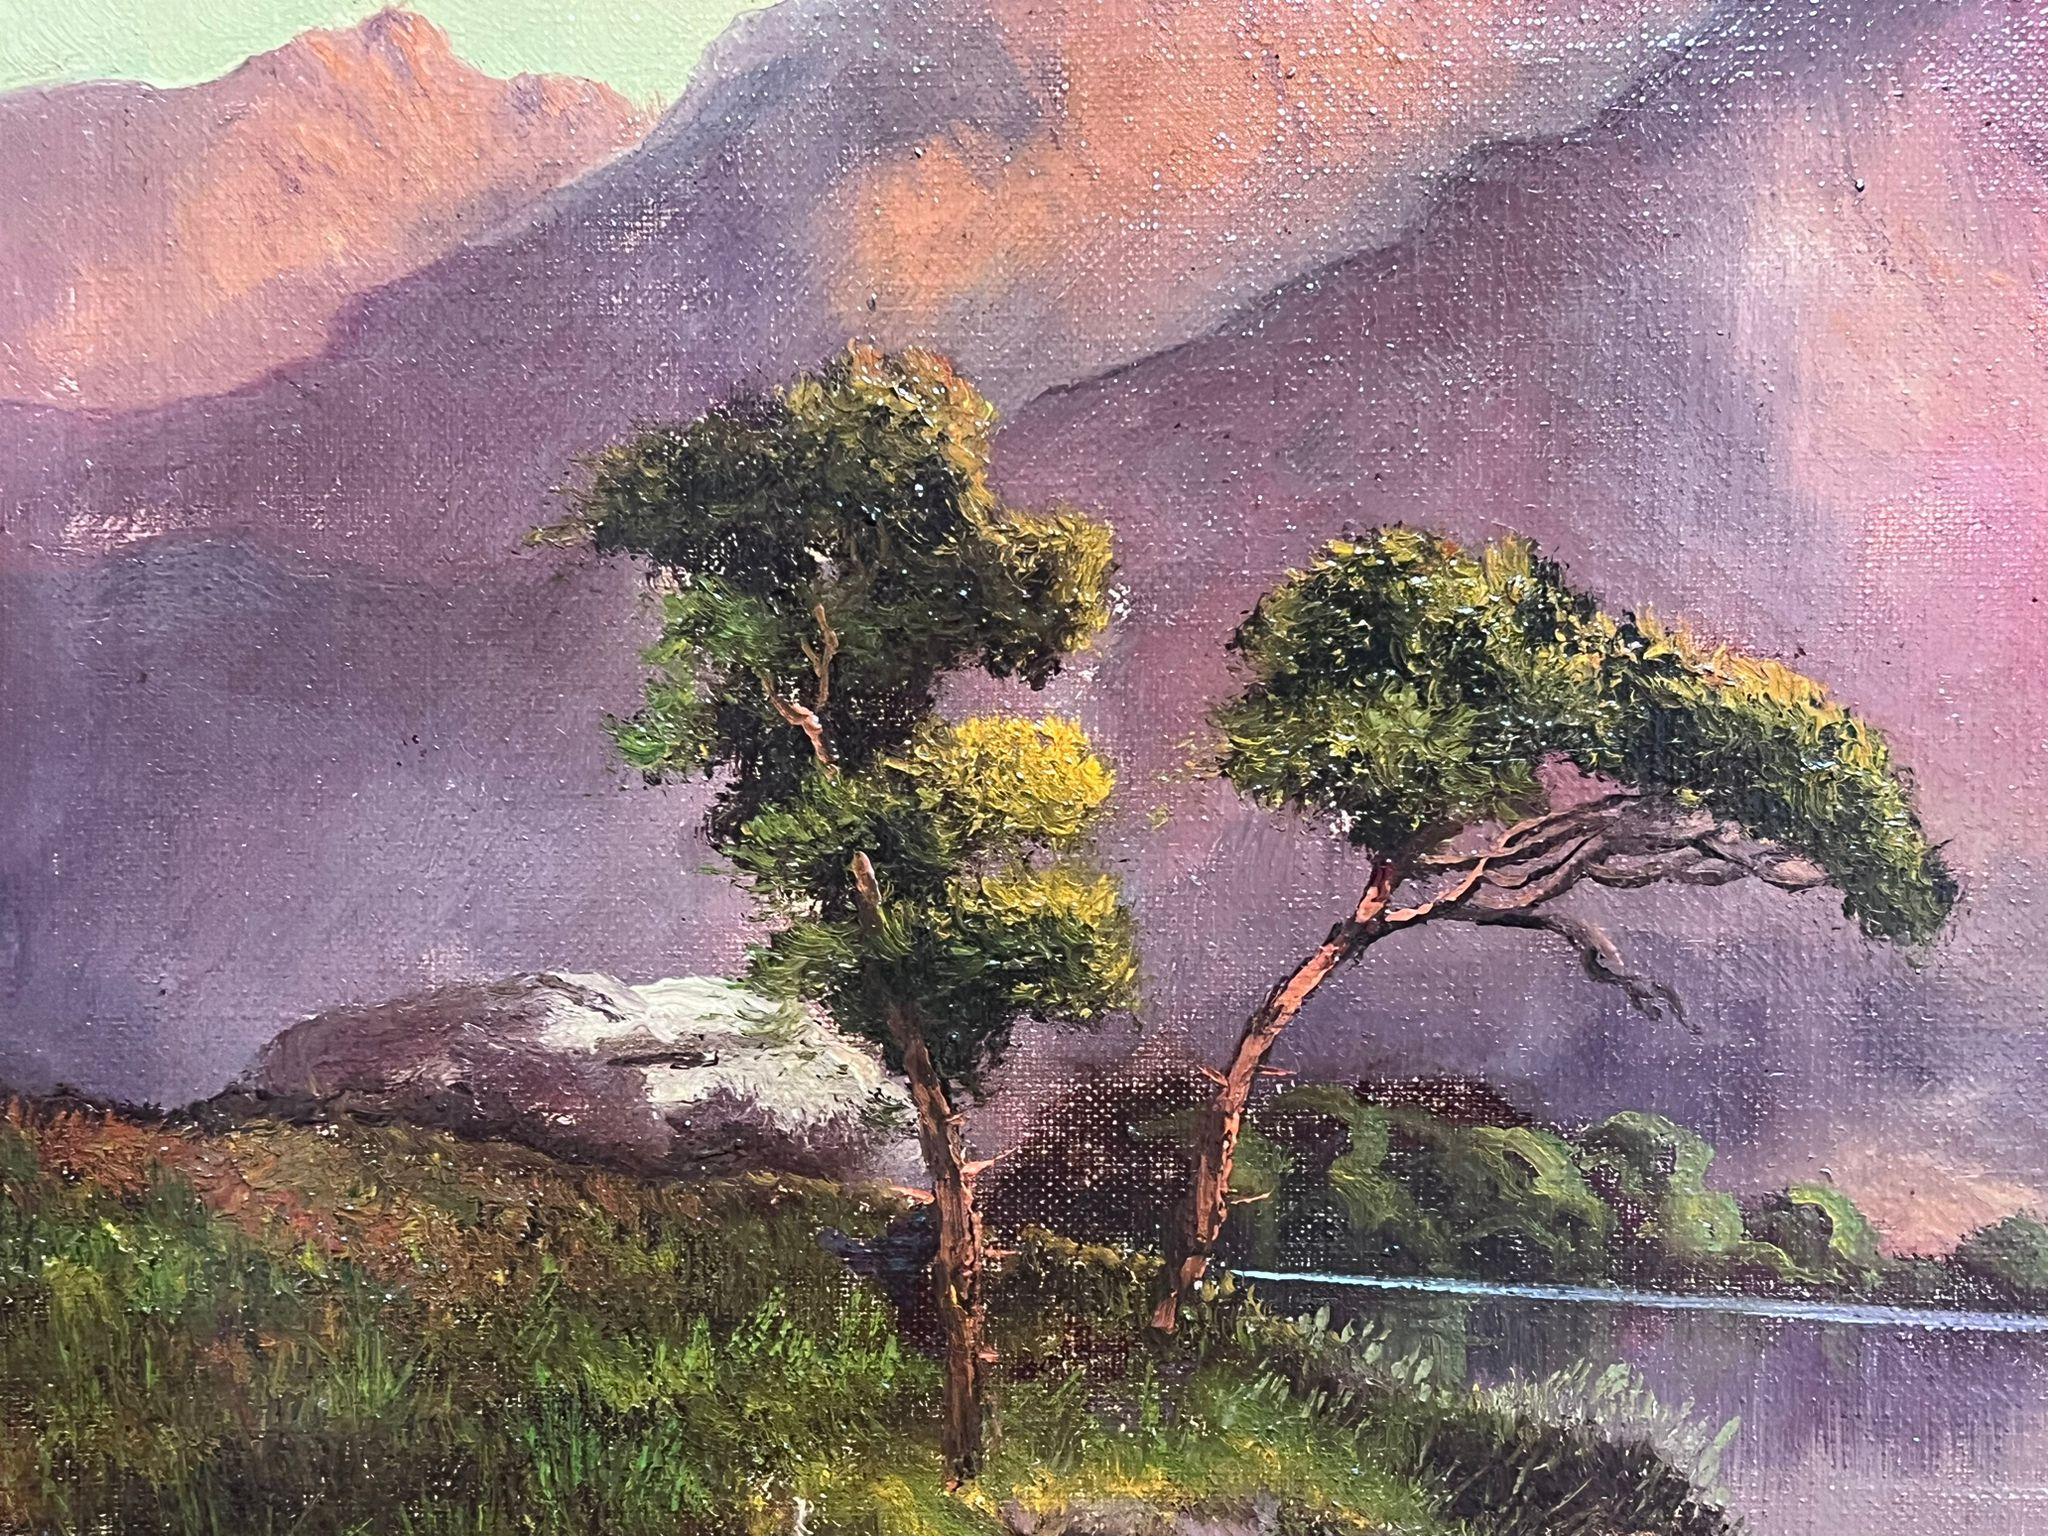 Loch Awe (Scottish Highlands, see notes below)
by Jack Maurice Ducker, British circa 1900's
signed lower corner, titled verso
oil on canvas, framed
framed: 21 x 29 inches
canvas: 16 x 24 inches
provenance: private collection, UK
condition: very good